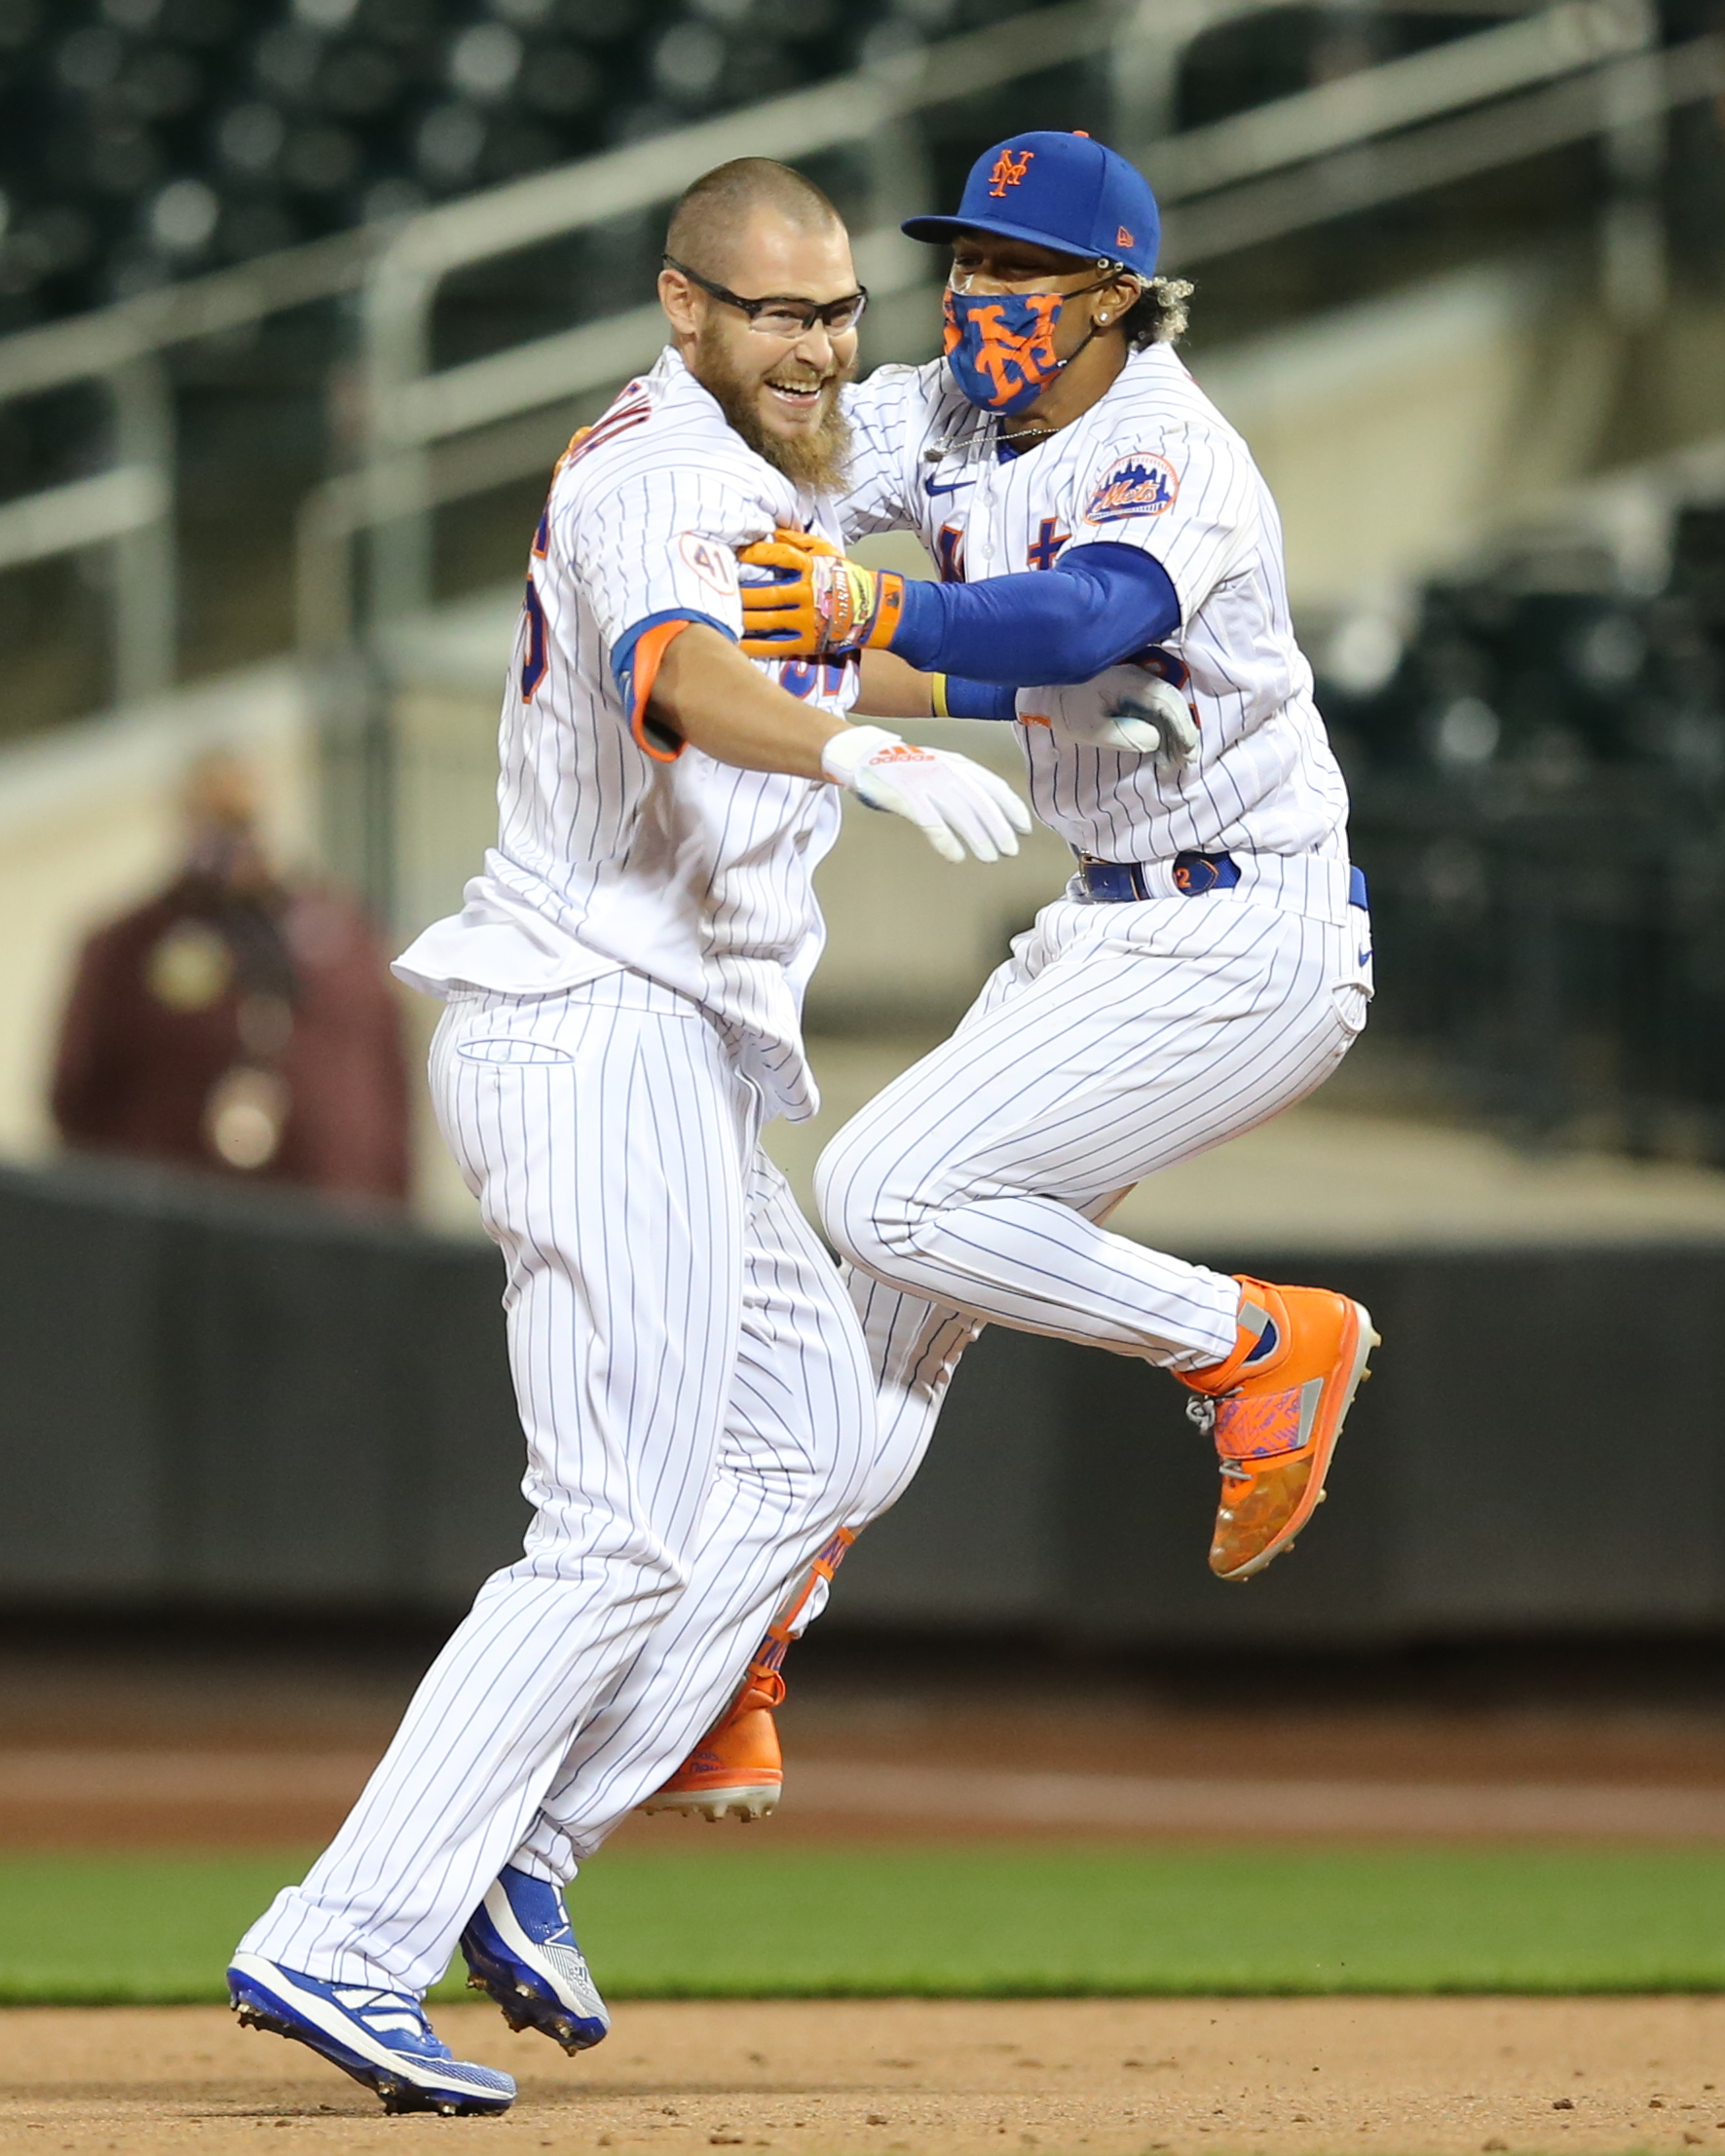 New York Mets pinch hitter Patrick Mazeika (76) celebrates with shortstop Francisco Lindor (12) after his game-winning RBI during the bottom of the ninth inning against the Baltimore Orioles at Citi Field.